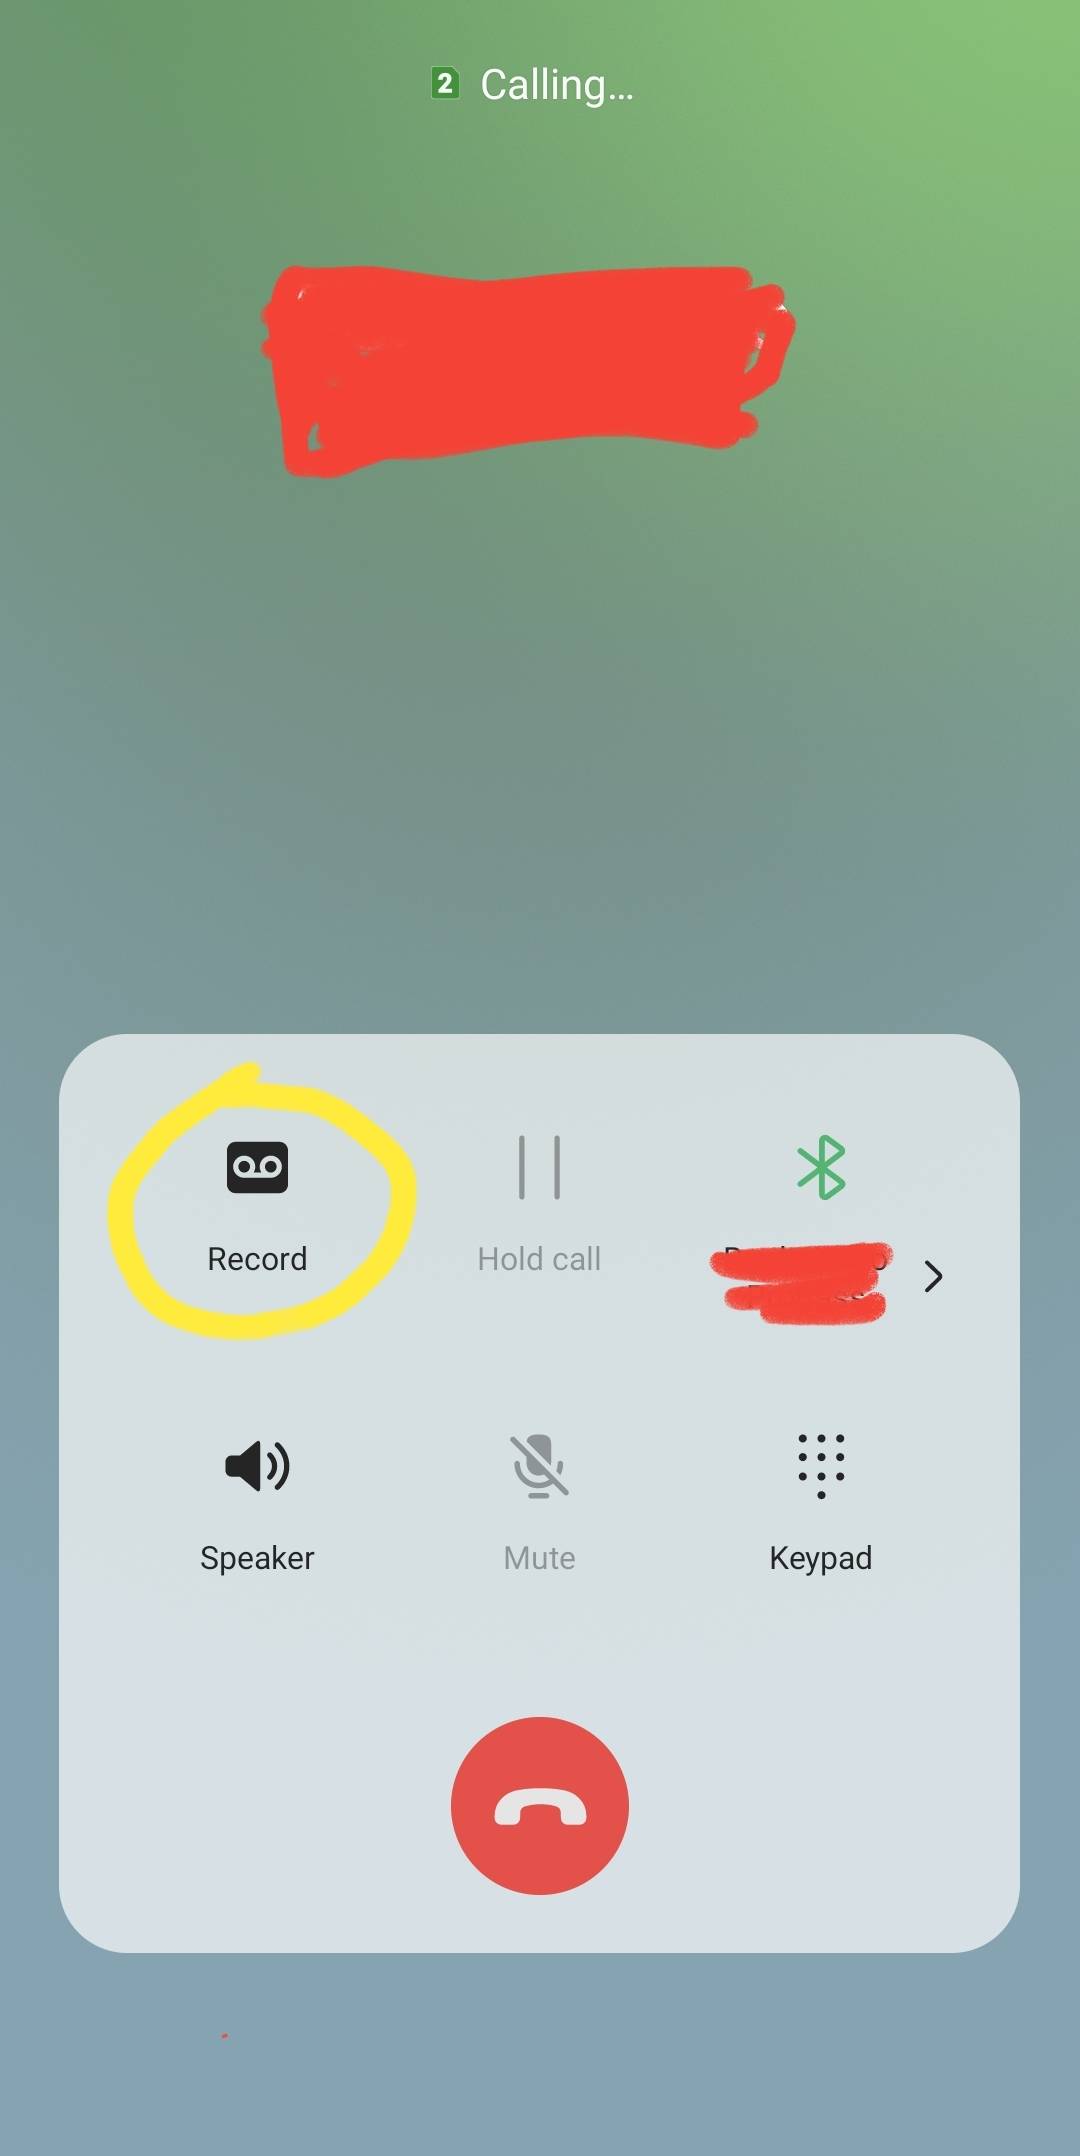 Recording feature icon should be in call mode. - Samsung Members